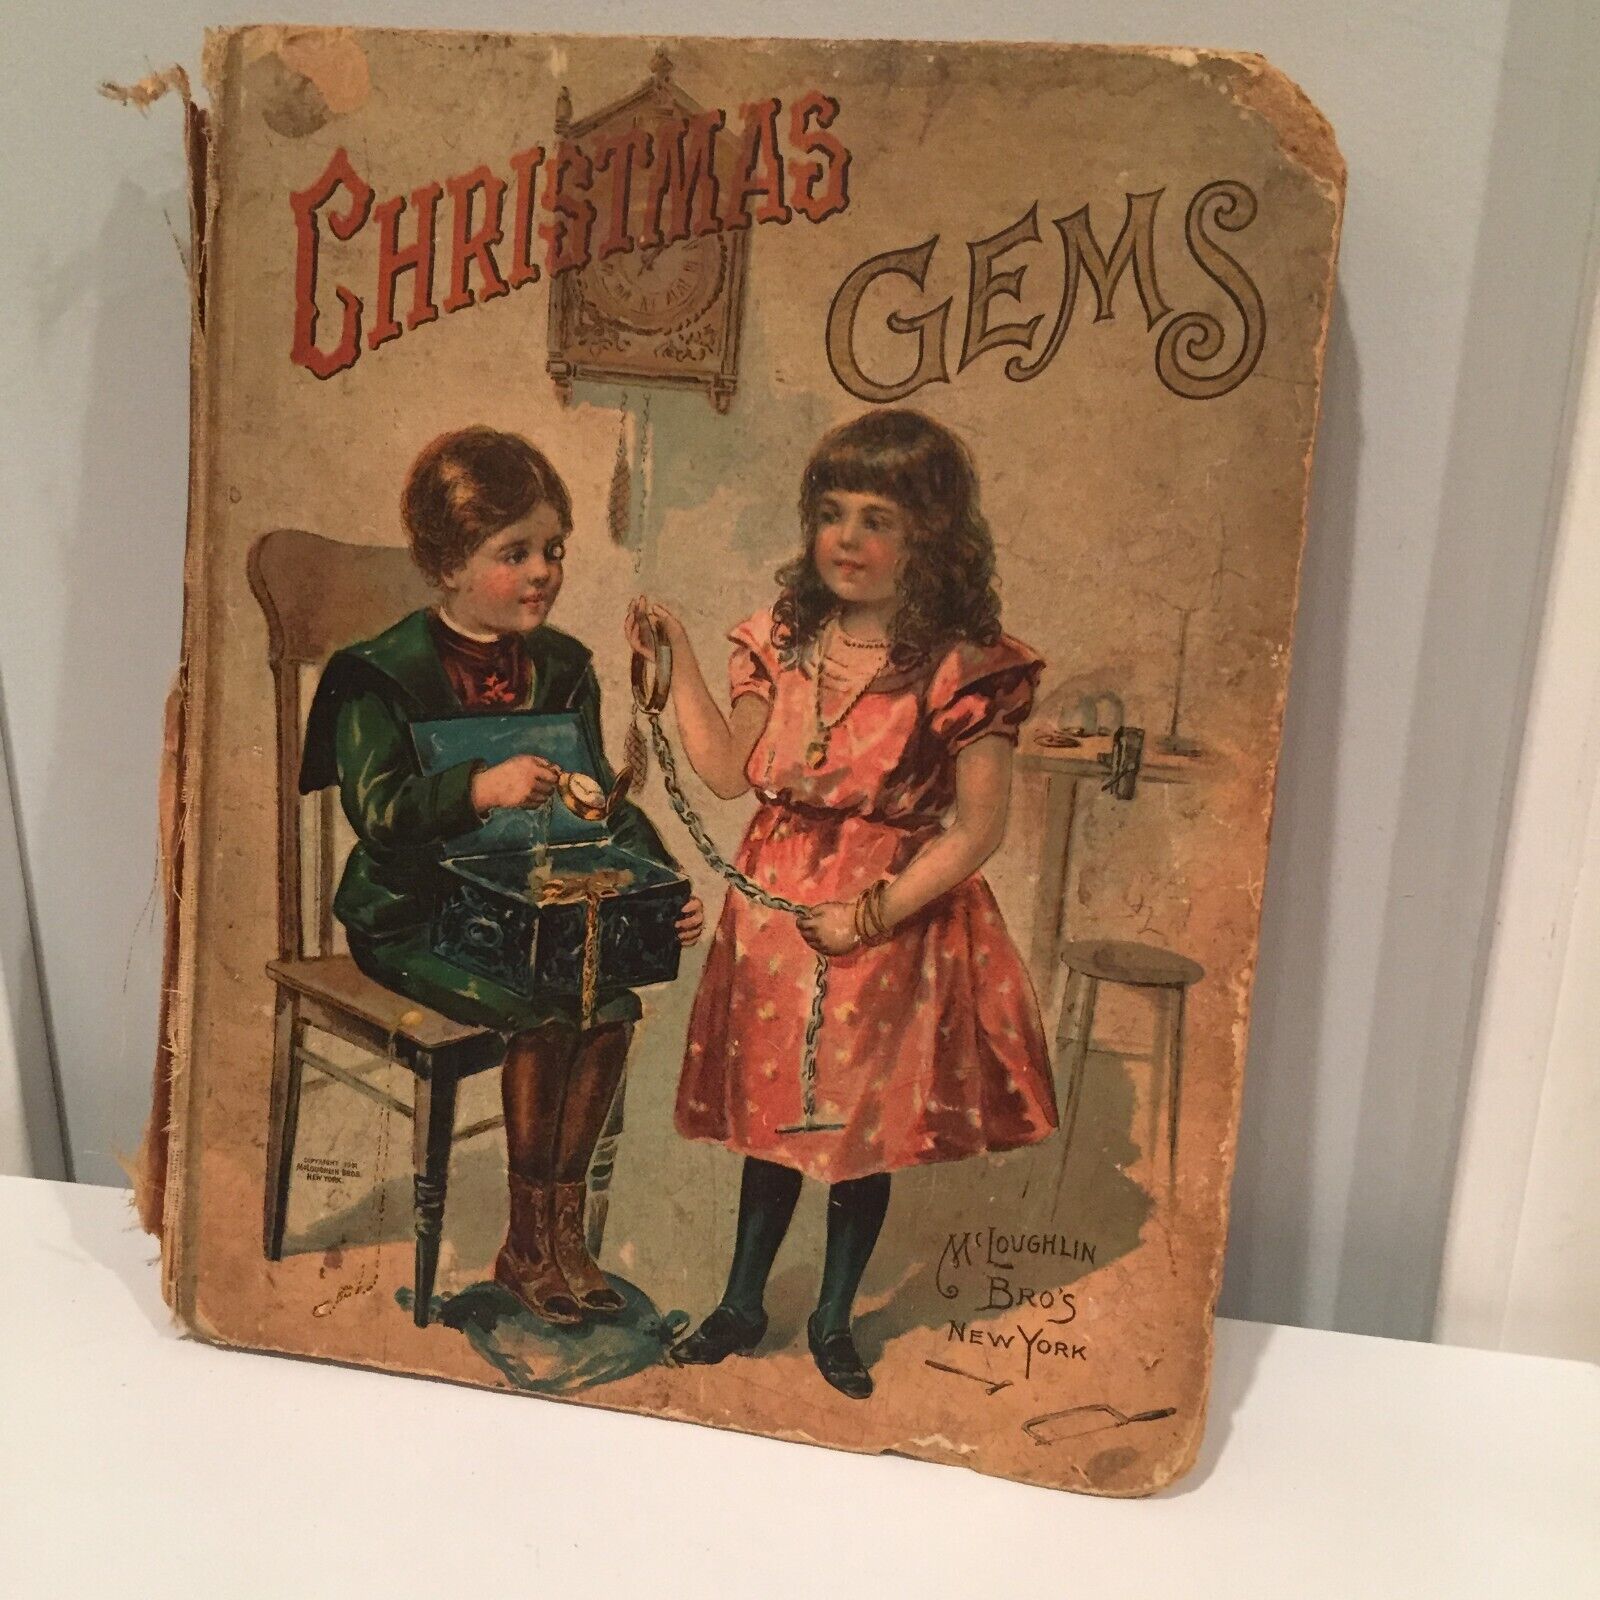 Vintage Victorian Children's Book Christmas Gems early 1900's